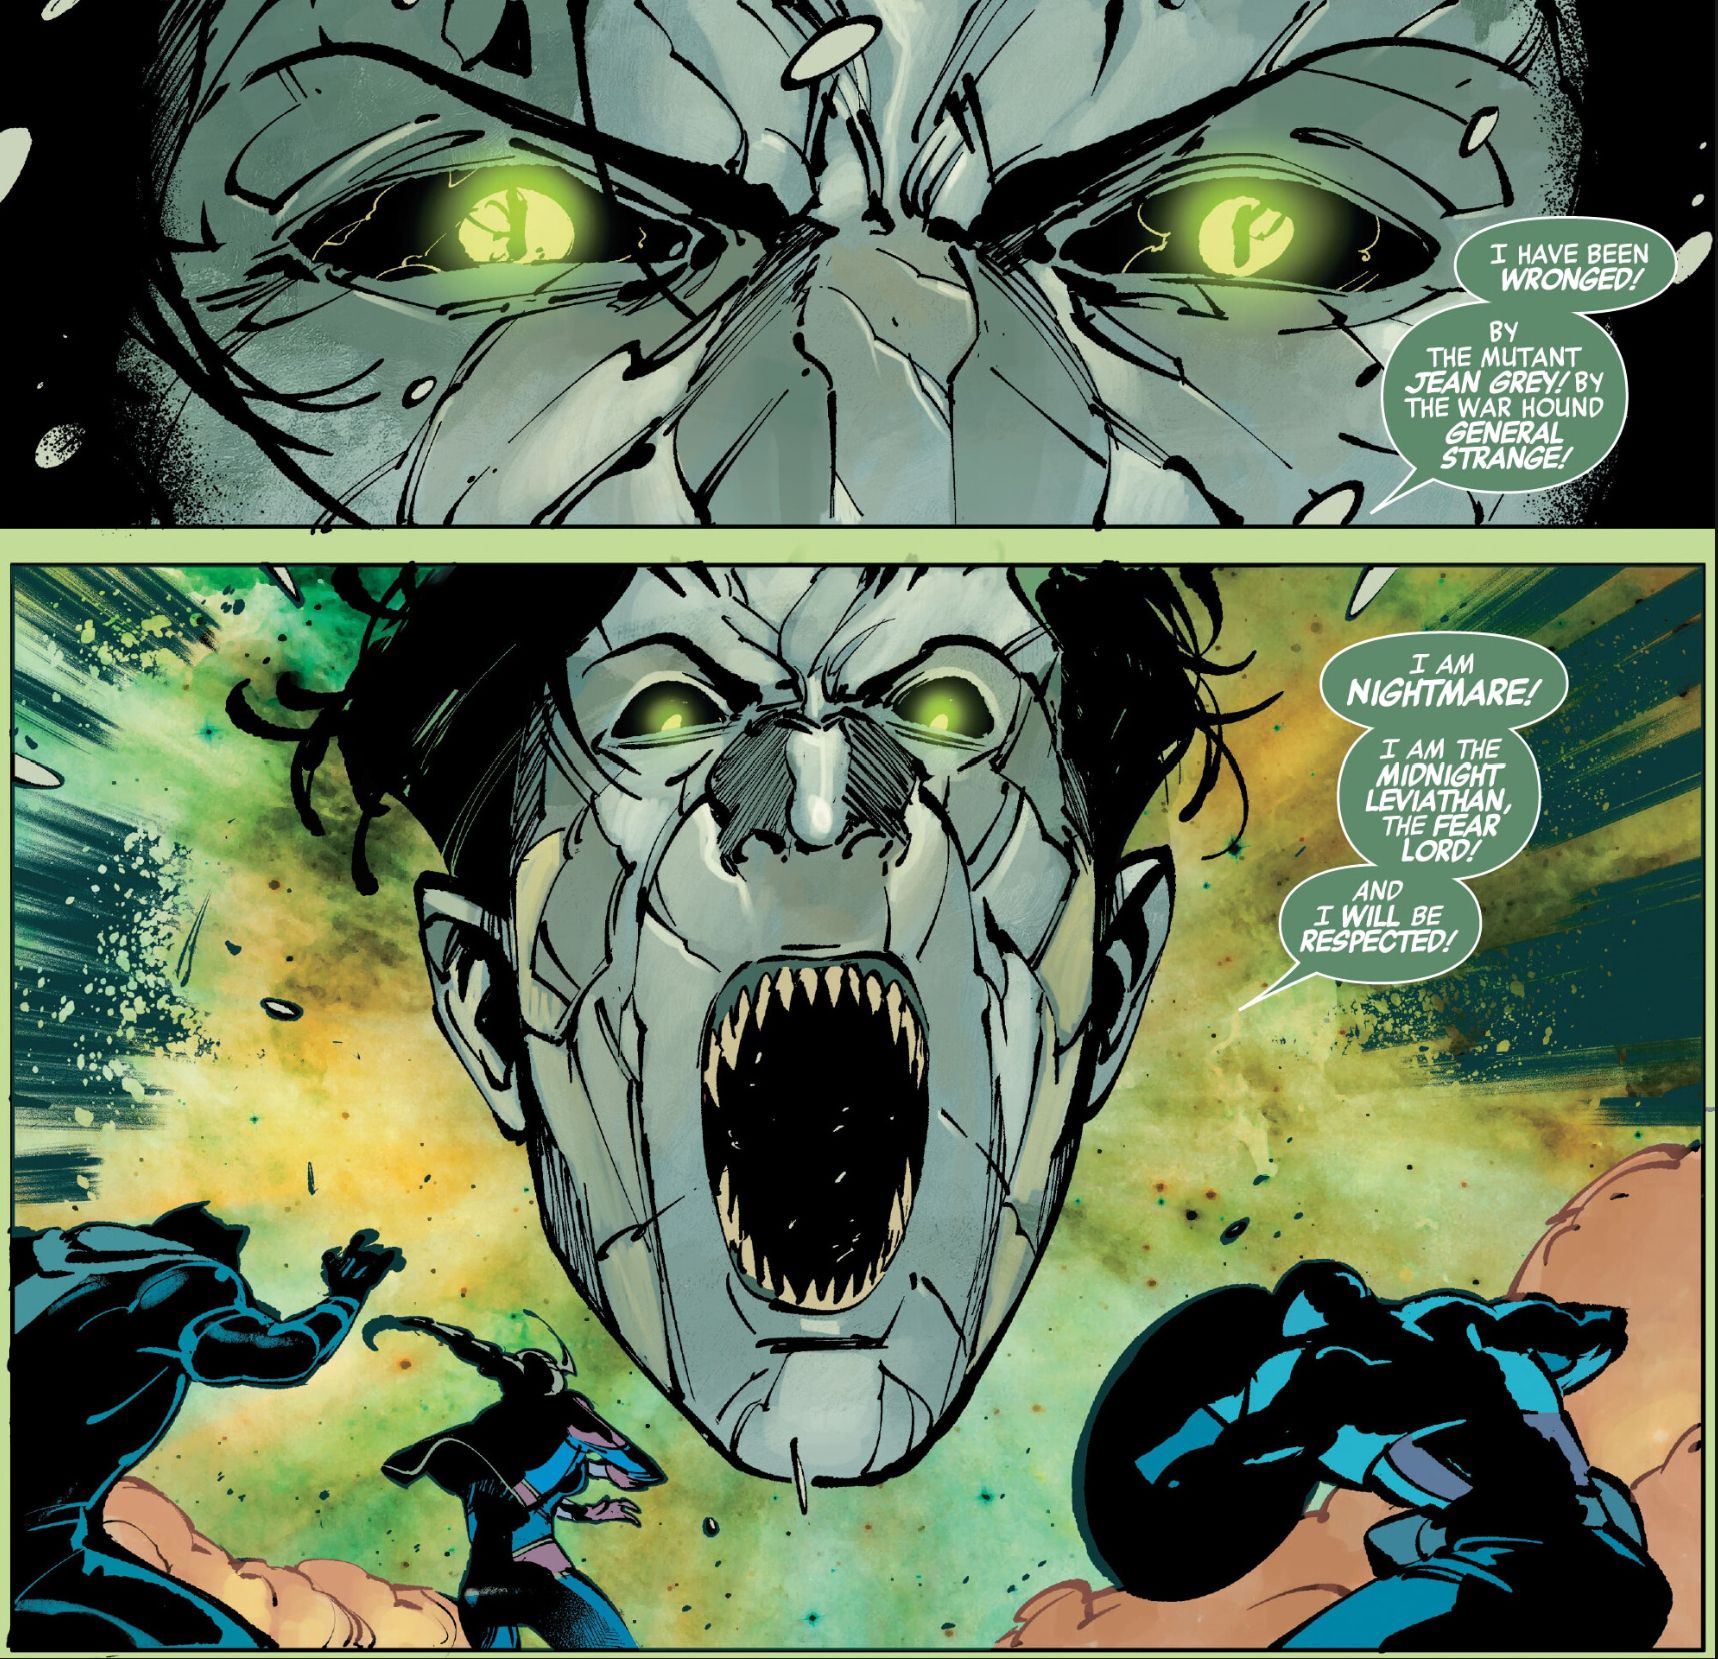 Comic book panels: Taking the shape of a gigantic, screaming head with pointed teeth, Nightmare lets out a bellow that forces the Avengers back.